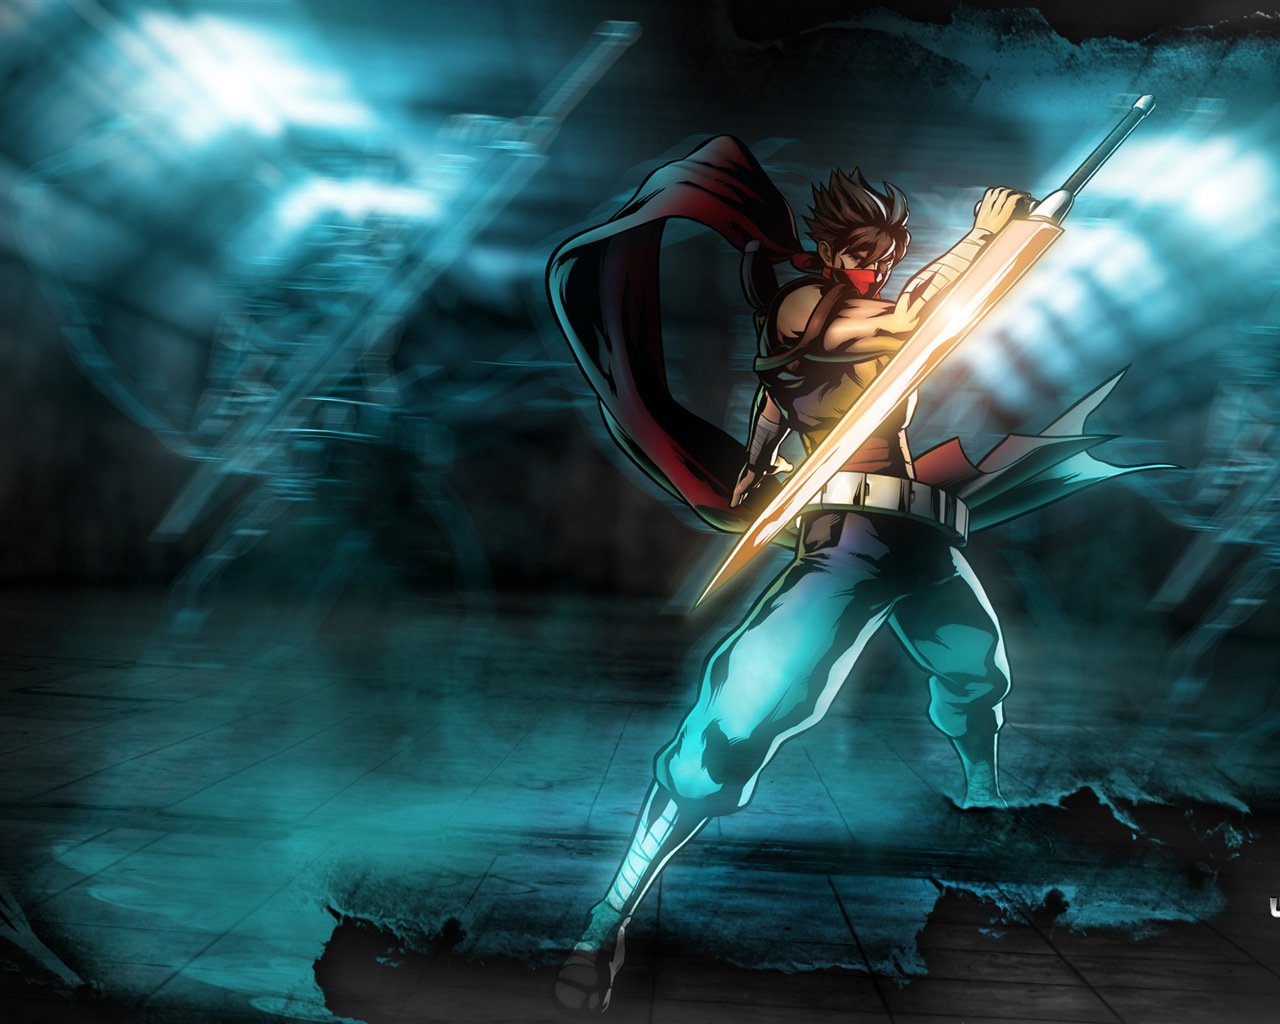 Marvel VS. Capcom 3: Fate of Two Worlds HD game wallpapers #23 - 1280x1024